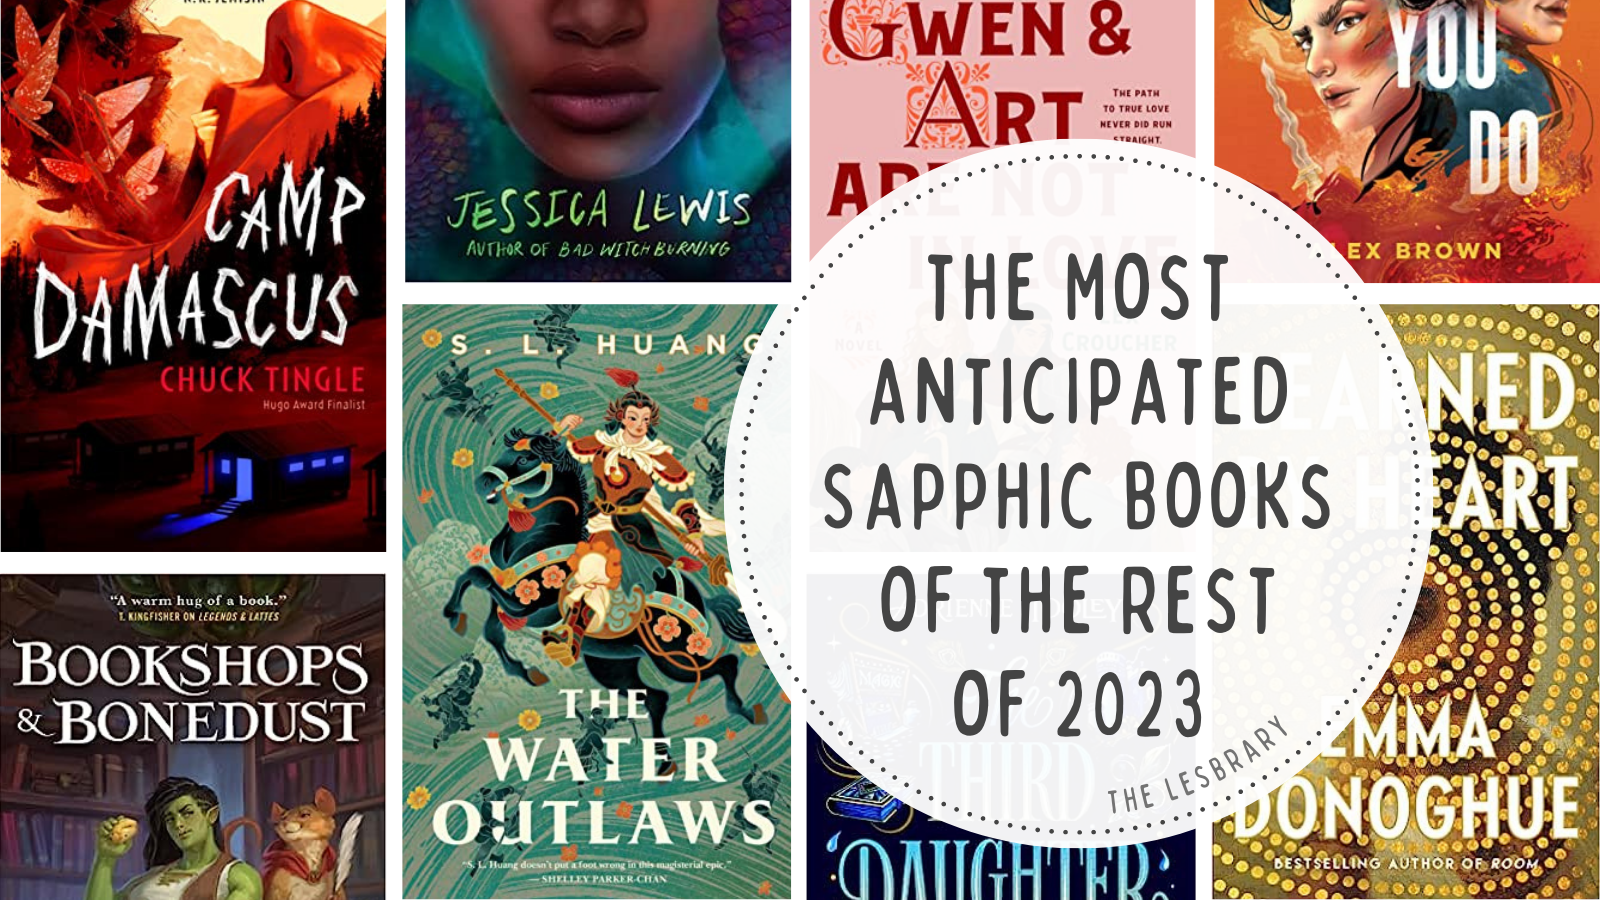 a collage of the sapphic book covers listed with the text The Most Anticipated Sapphic Books of the Rest of 2023